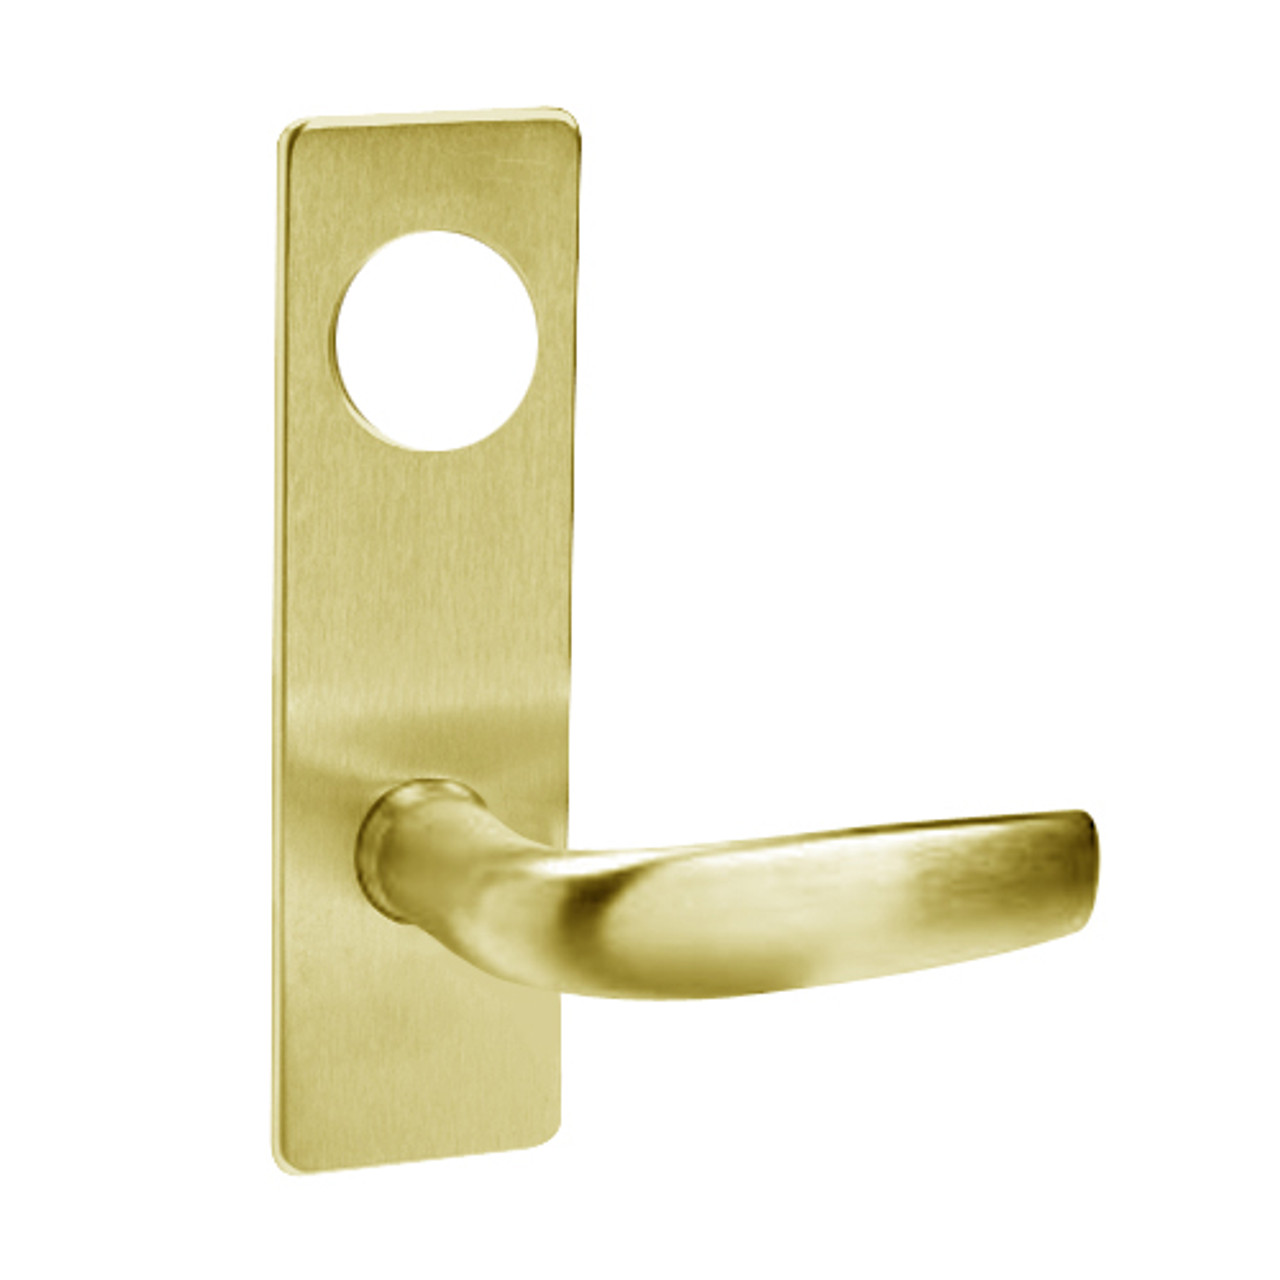 ML2069-CSM-605-CL7 Corbin Russwin ML2000 Series IC 7-Pin Less Core Mortise Institution Privacy Locksets with Citation Lever in Bright Brass